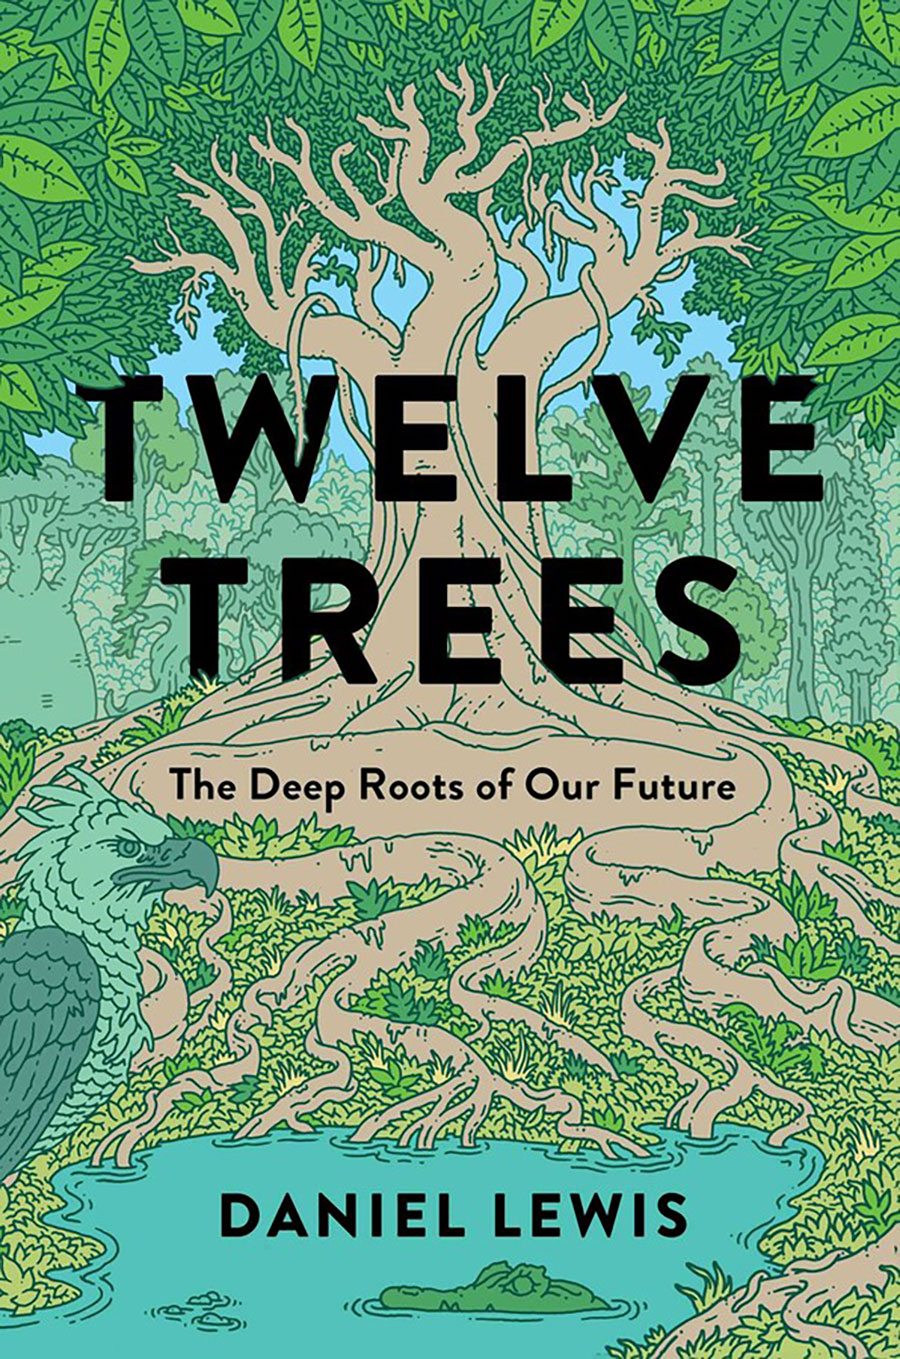 Book cover with the title in the center and a drawing of a tree with many roots, a large bird, and a crocodile.